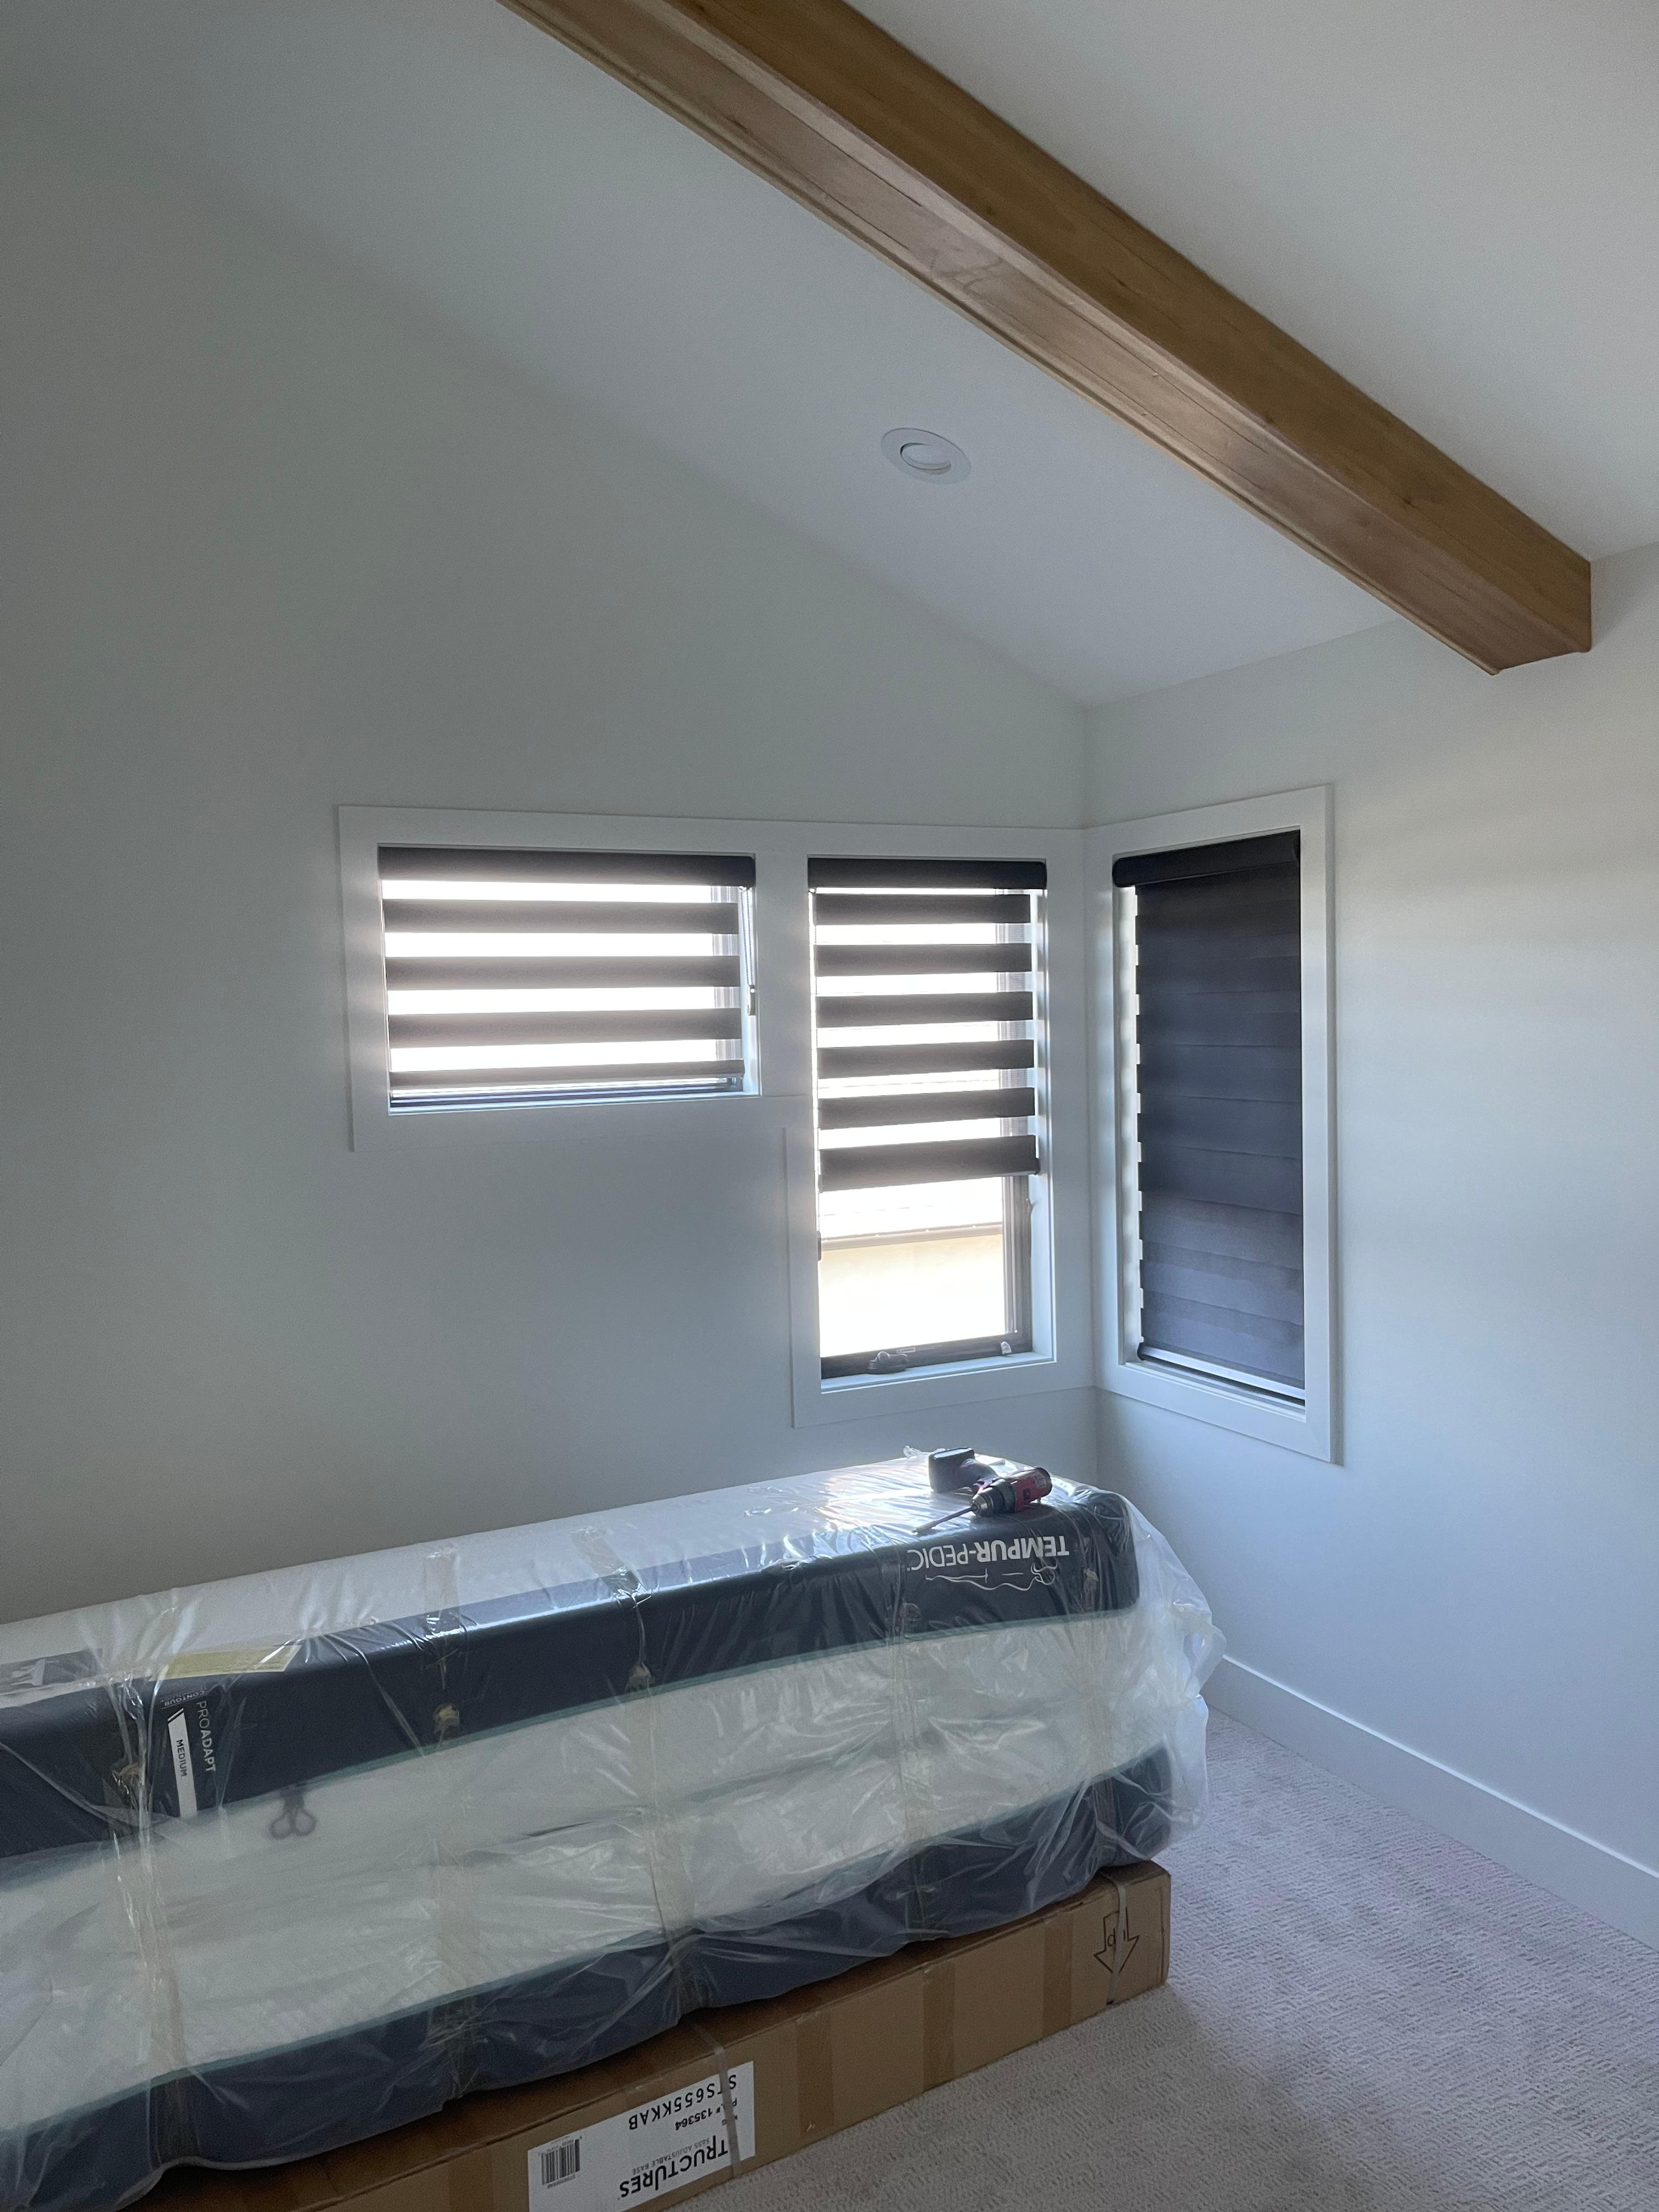 Craving that ultra-modern look? We love black and white deÌcor schemes-and our Illusion Shades are the perfect complement! Check out the way they spice up this Wells home!  BudgetBlindsMankato  IllusionShades  ShadesOfBeauty  FreeConsultation